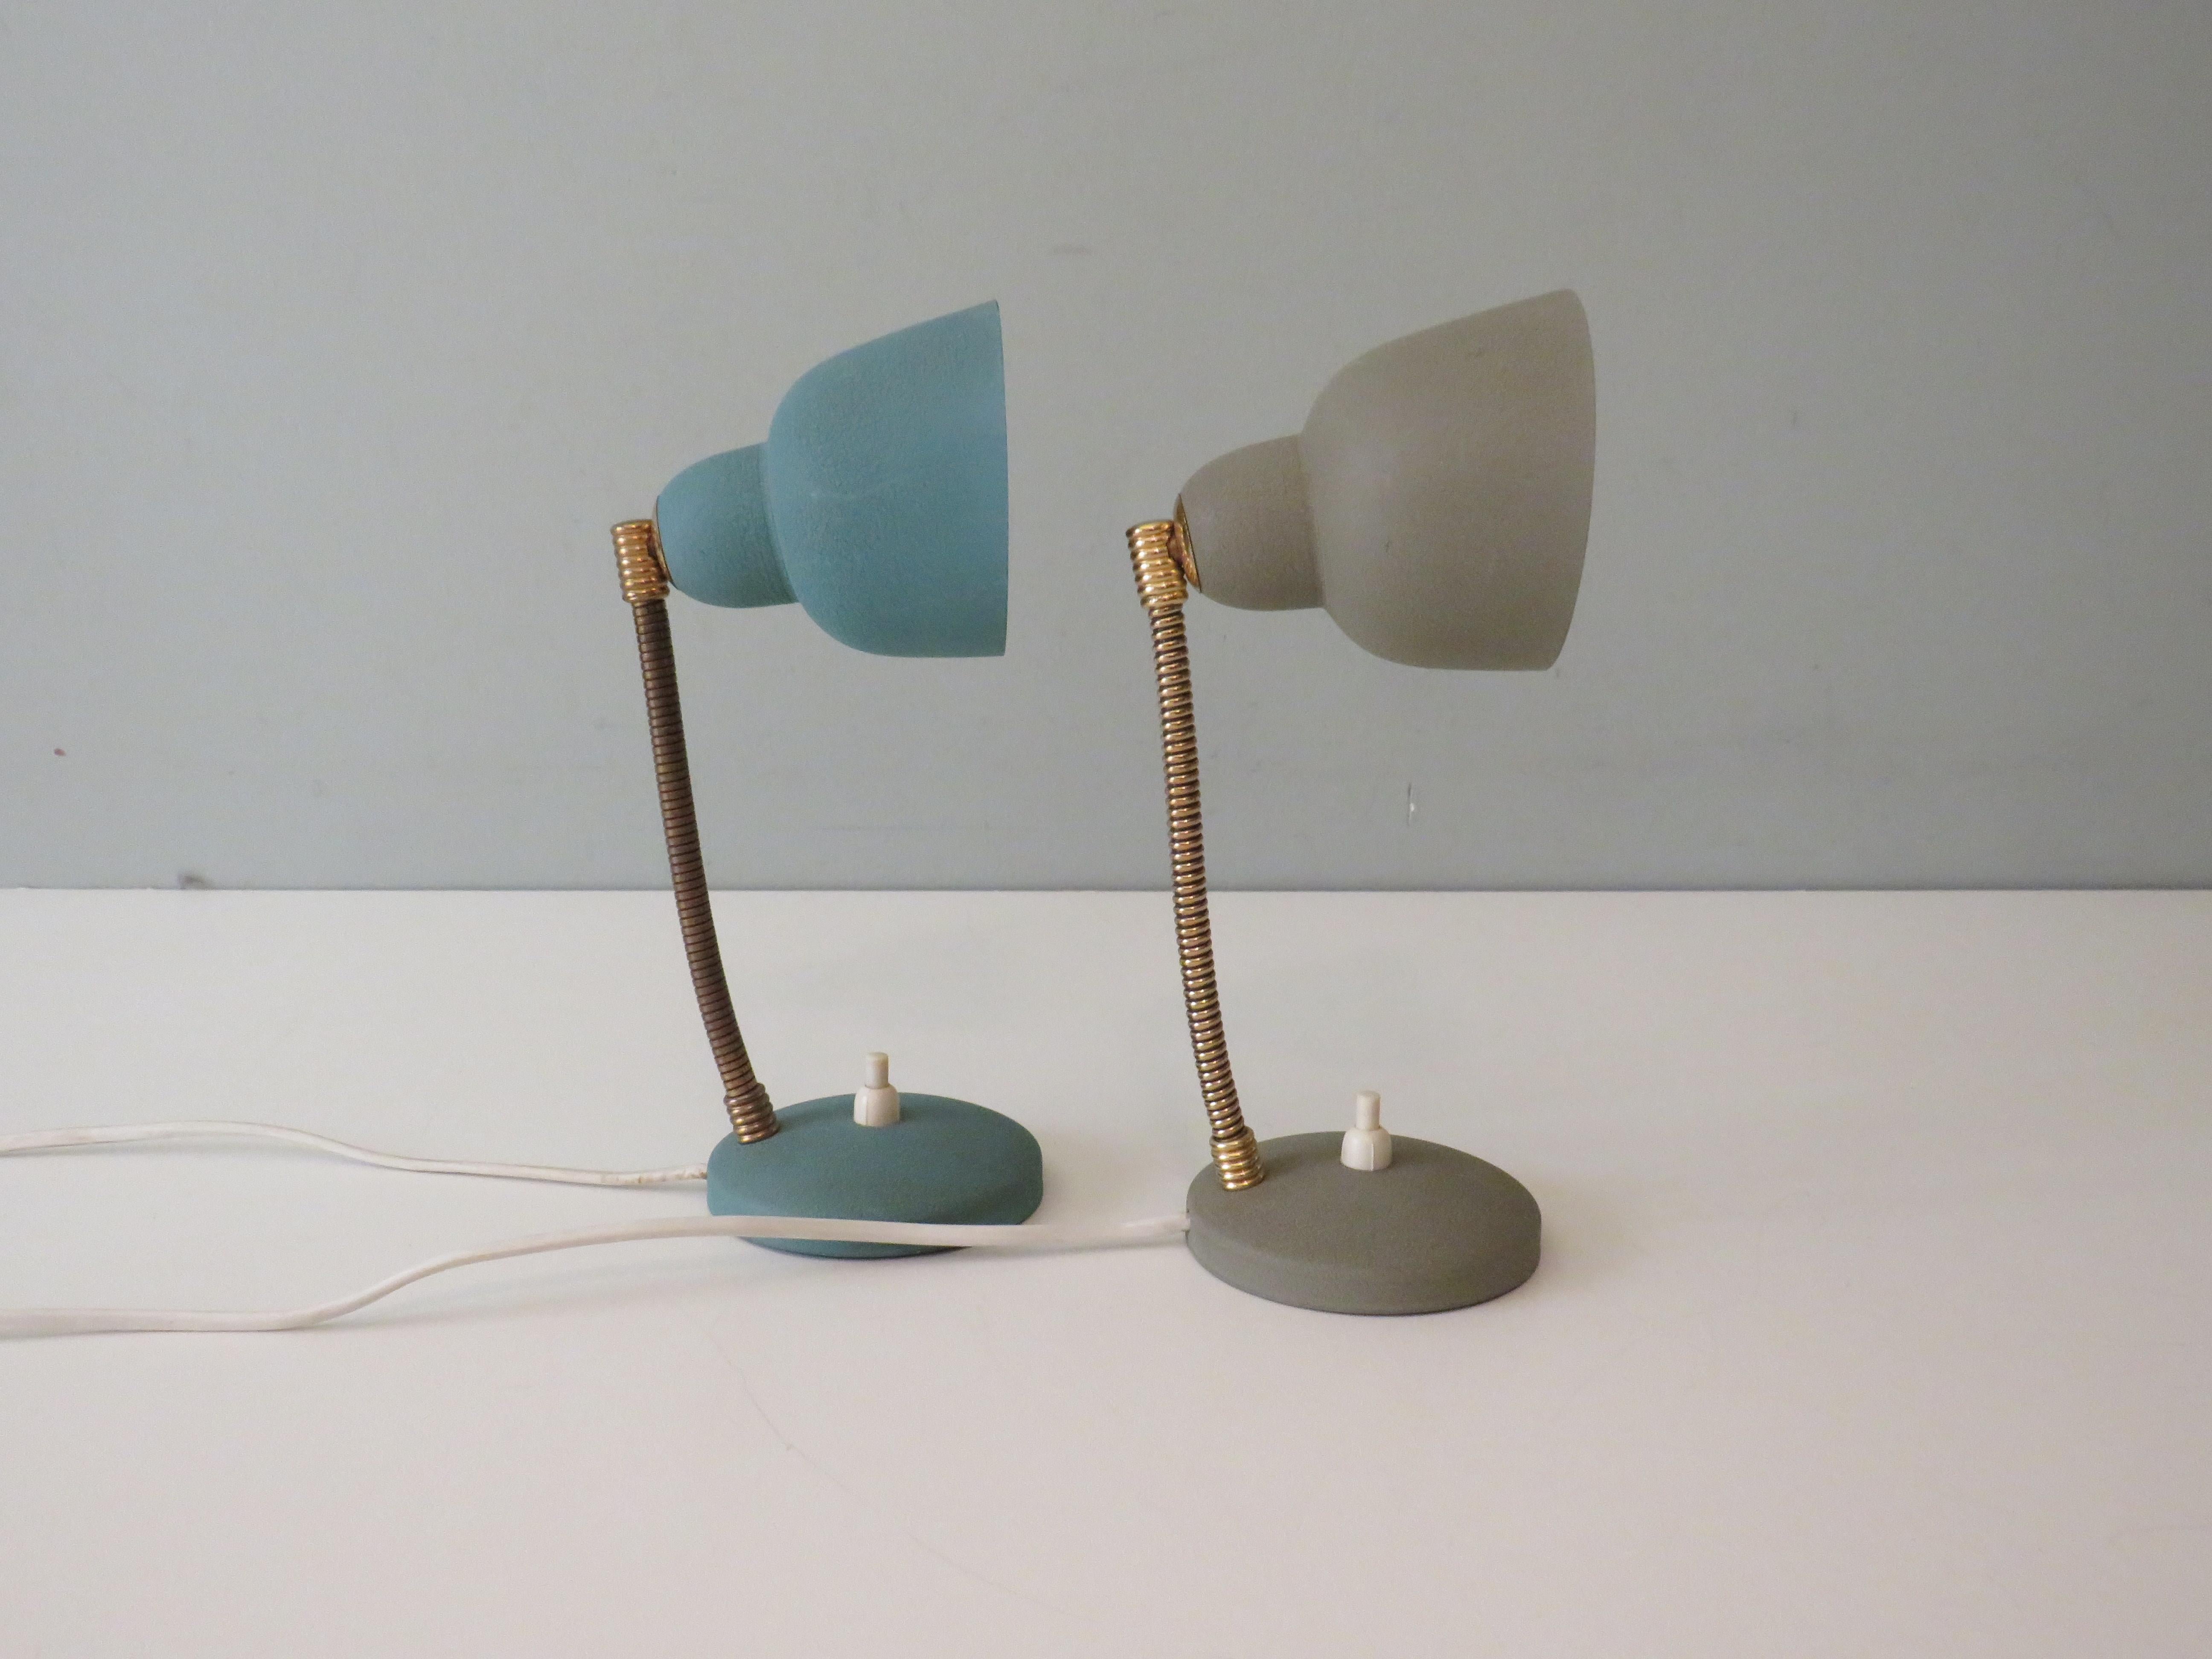 Mid-20th Century 2 Desk Lamps - Bedside Lamps from Aluminor, France 1950